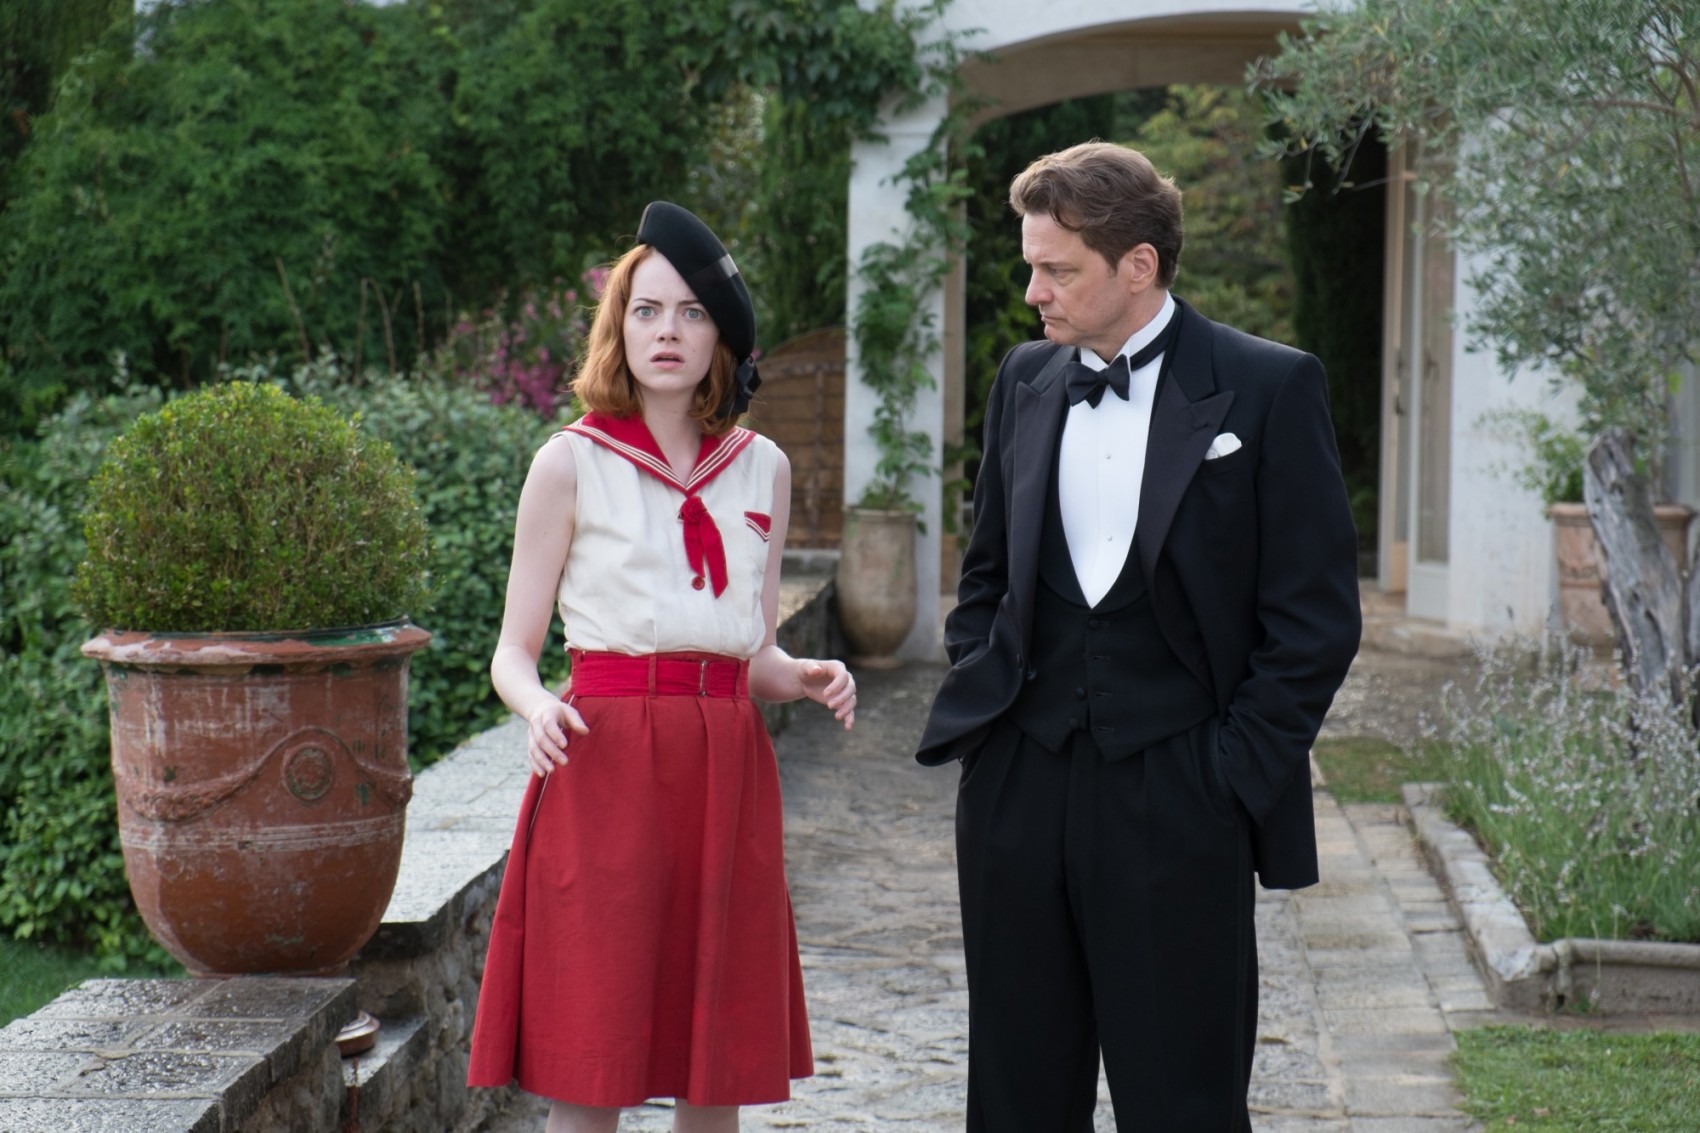 Woody Allen Colin Firth Emma Stone Magic in the moonlight